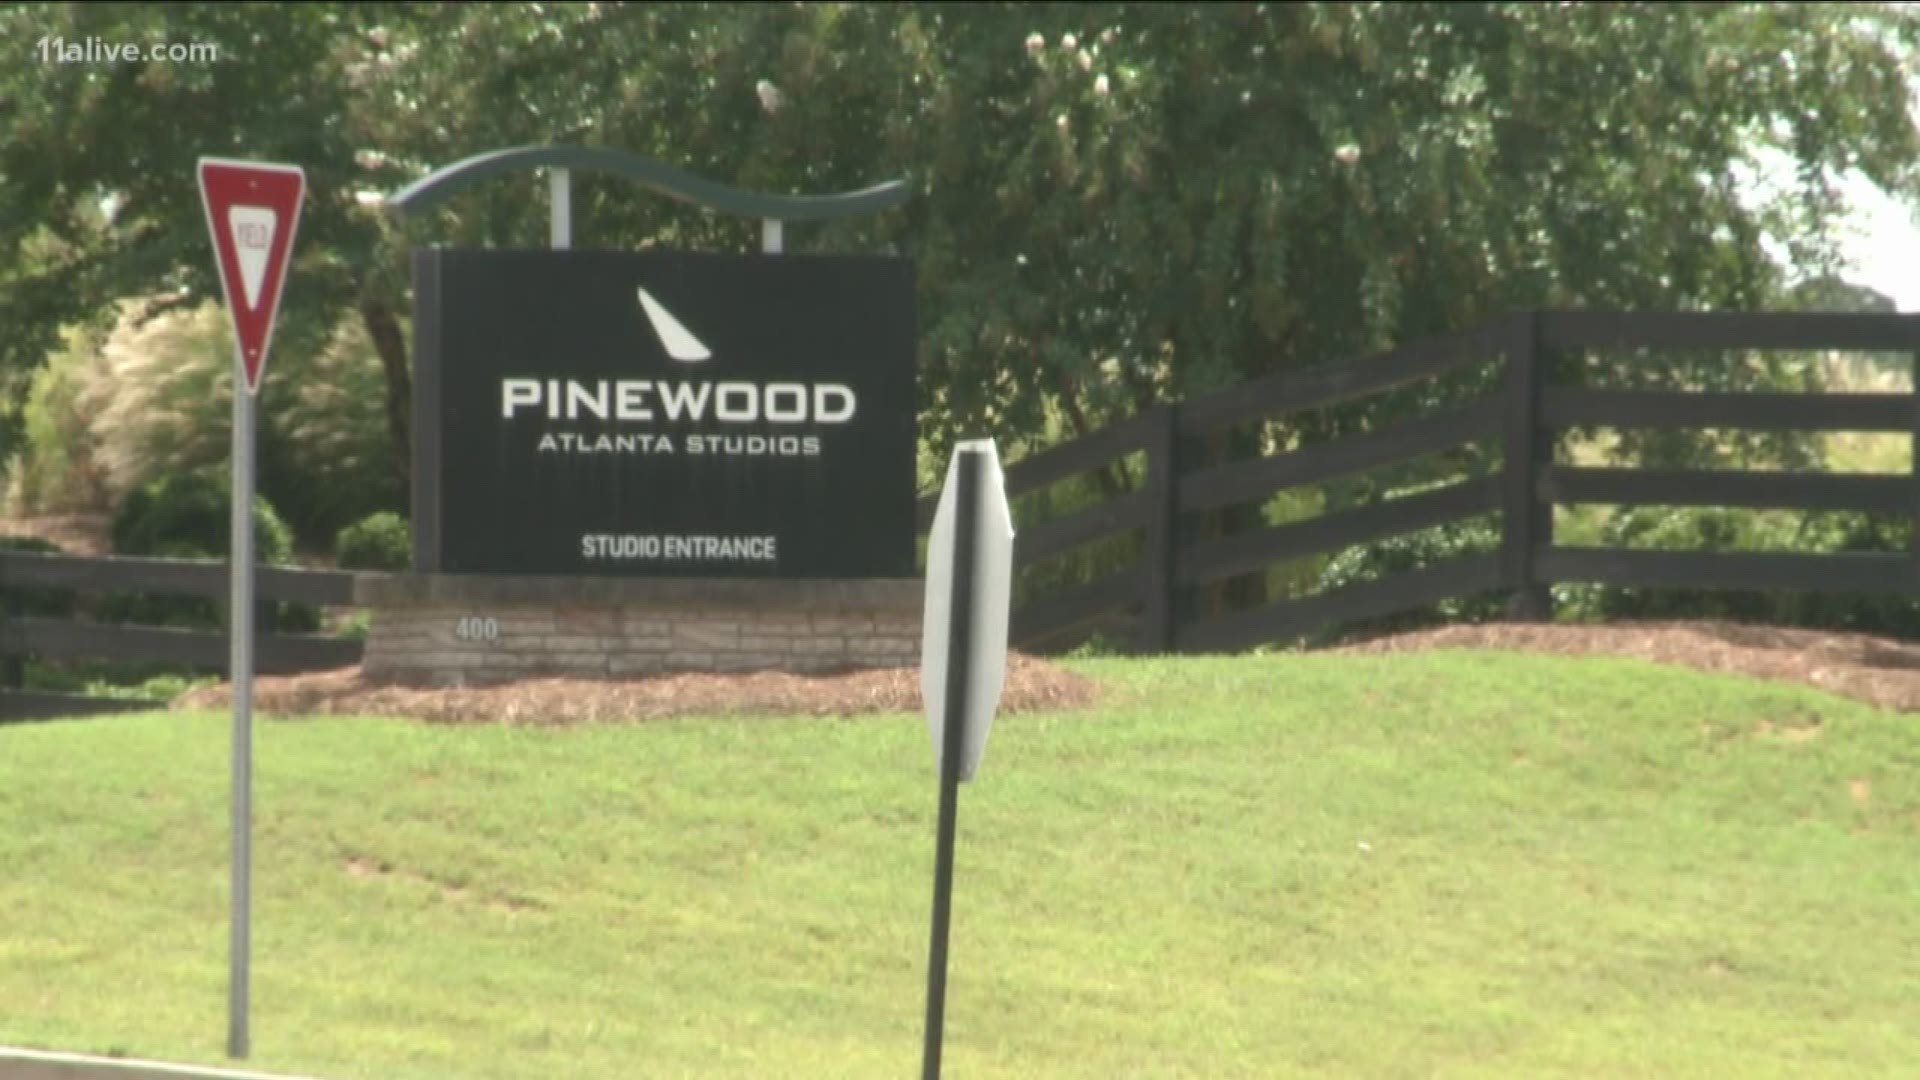 As the film industry exploded in the state, Pinewood Studios in Fayette County became the second largest production company in the U.S.